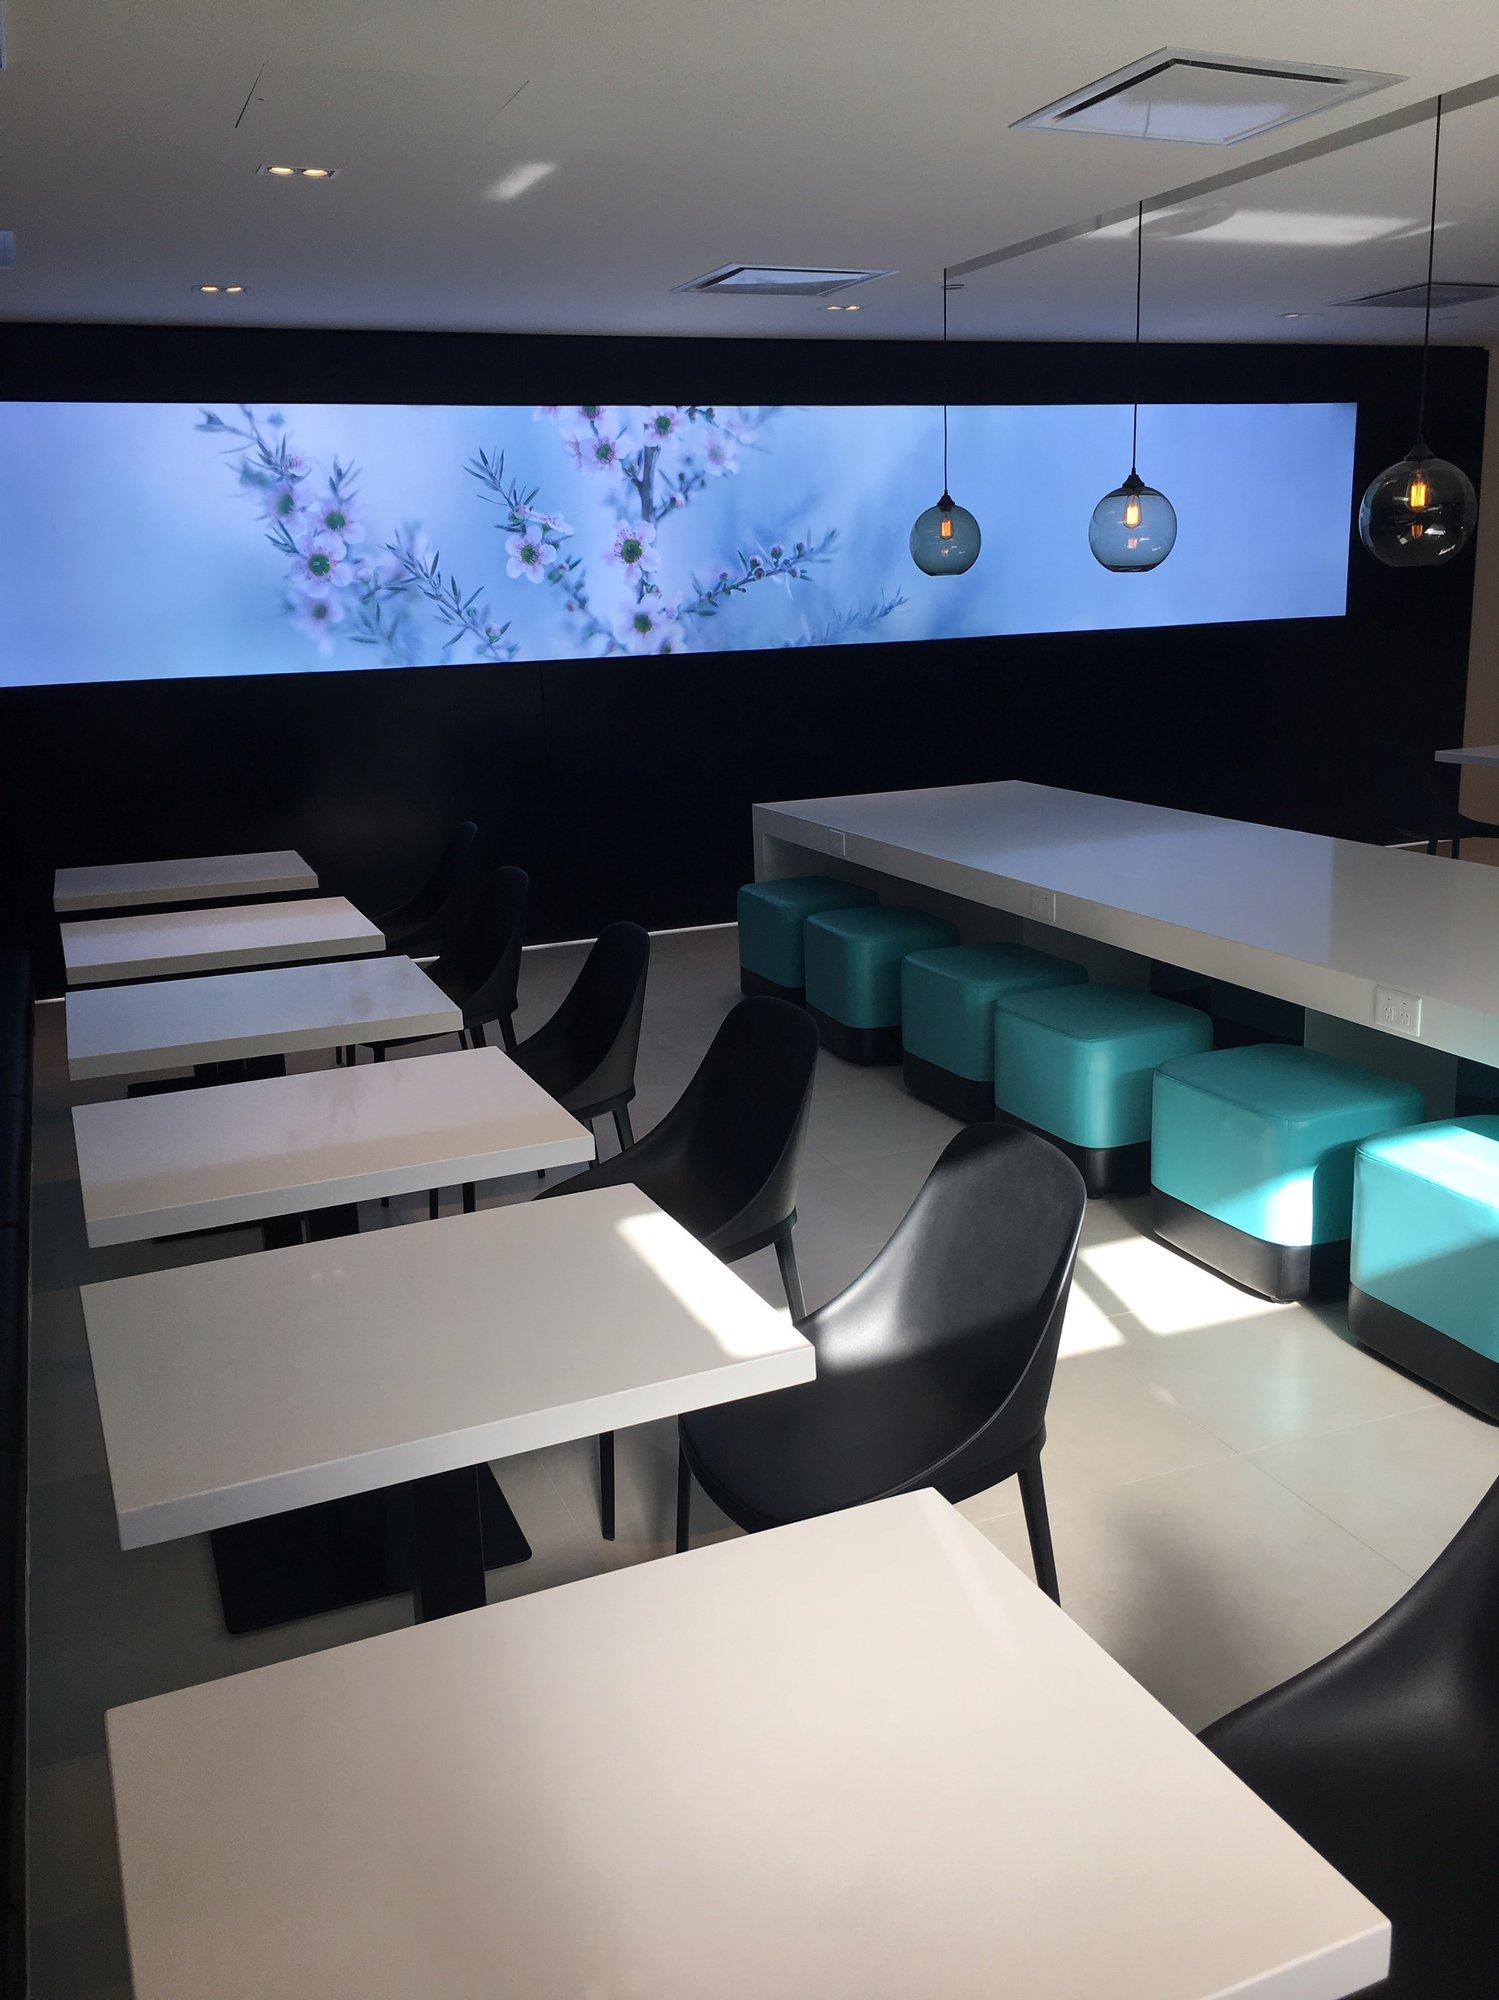 Air New Zealand Regional Lounge image 4 of 7